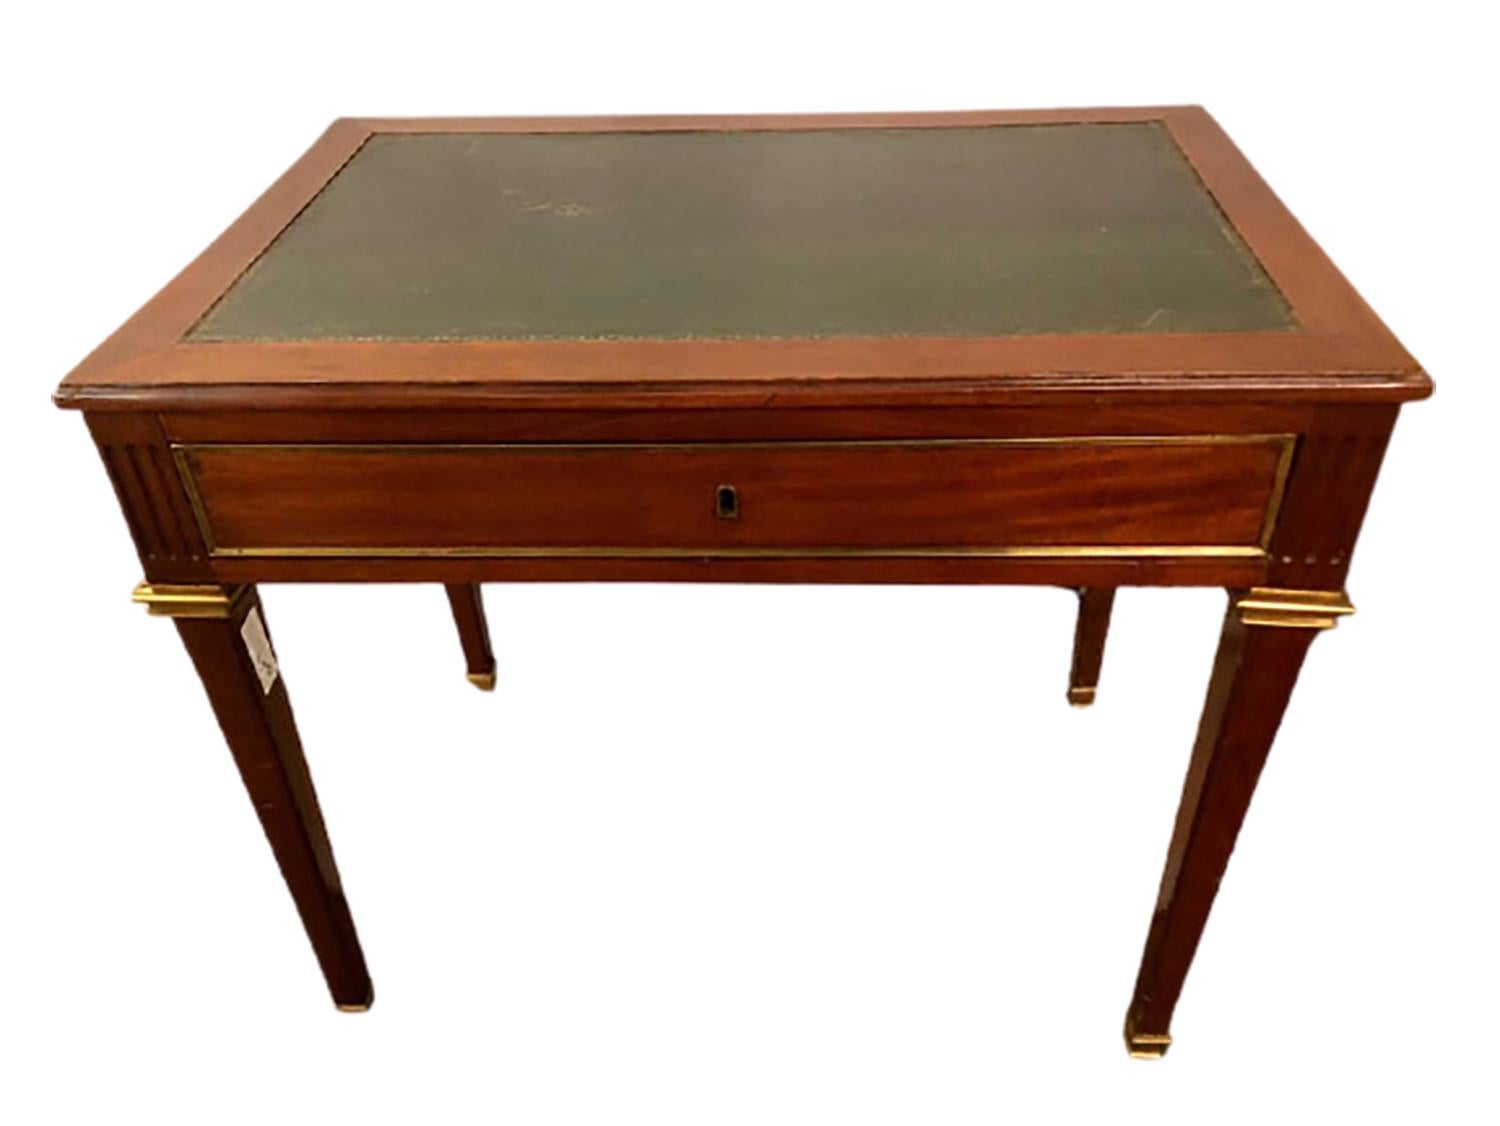 An early Louis XVI style leather top desk with pull-out sides and bronze mounts with a single centre drawer stamped Jansen. Pull outs measure 15.5 x 9 inches each.